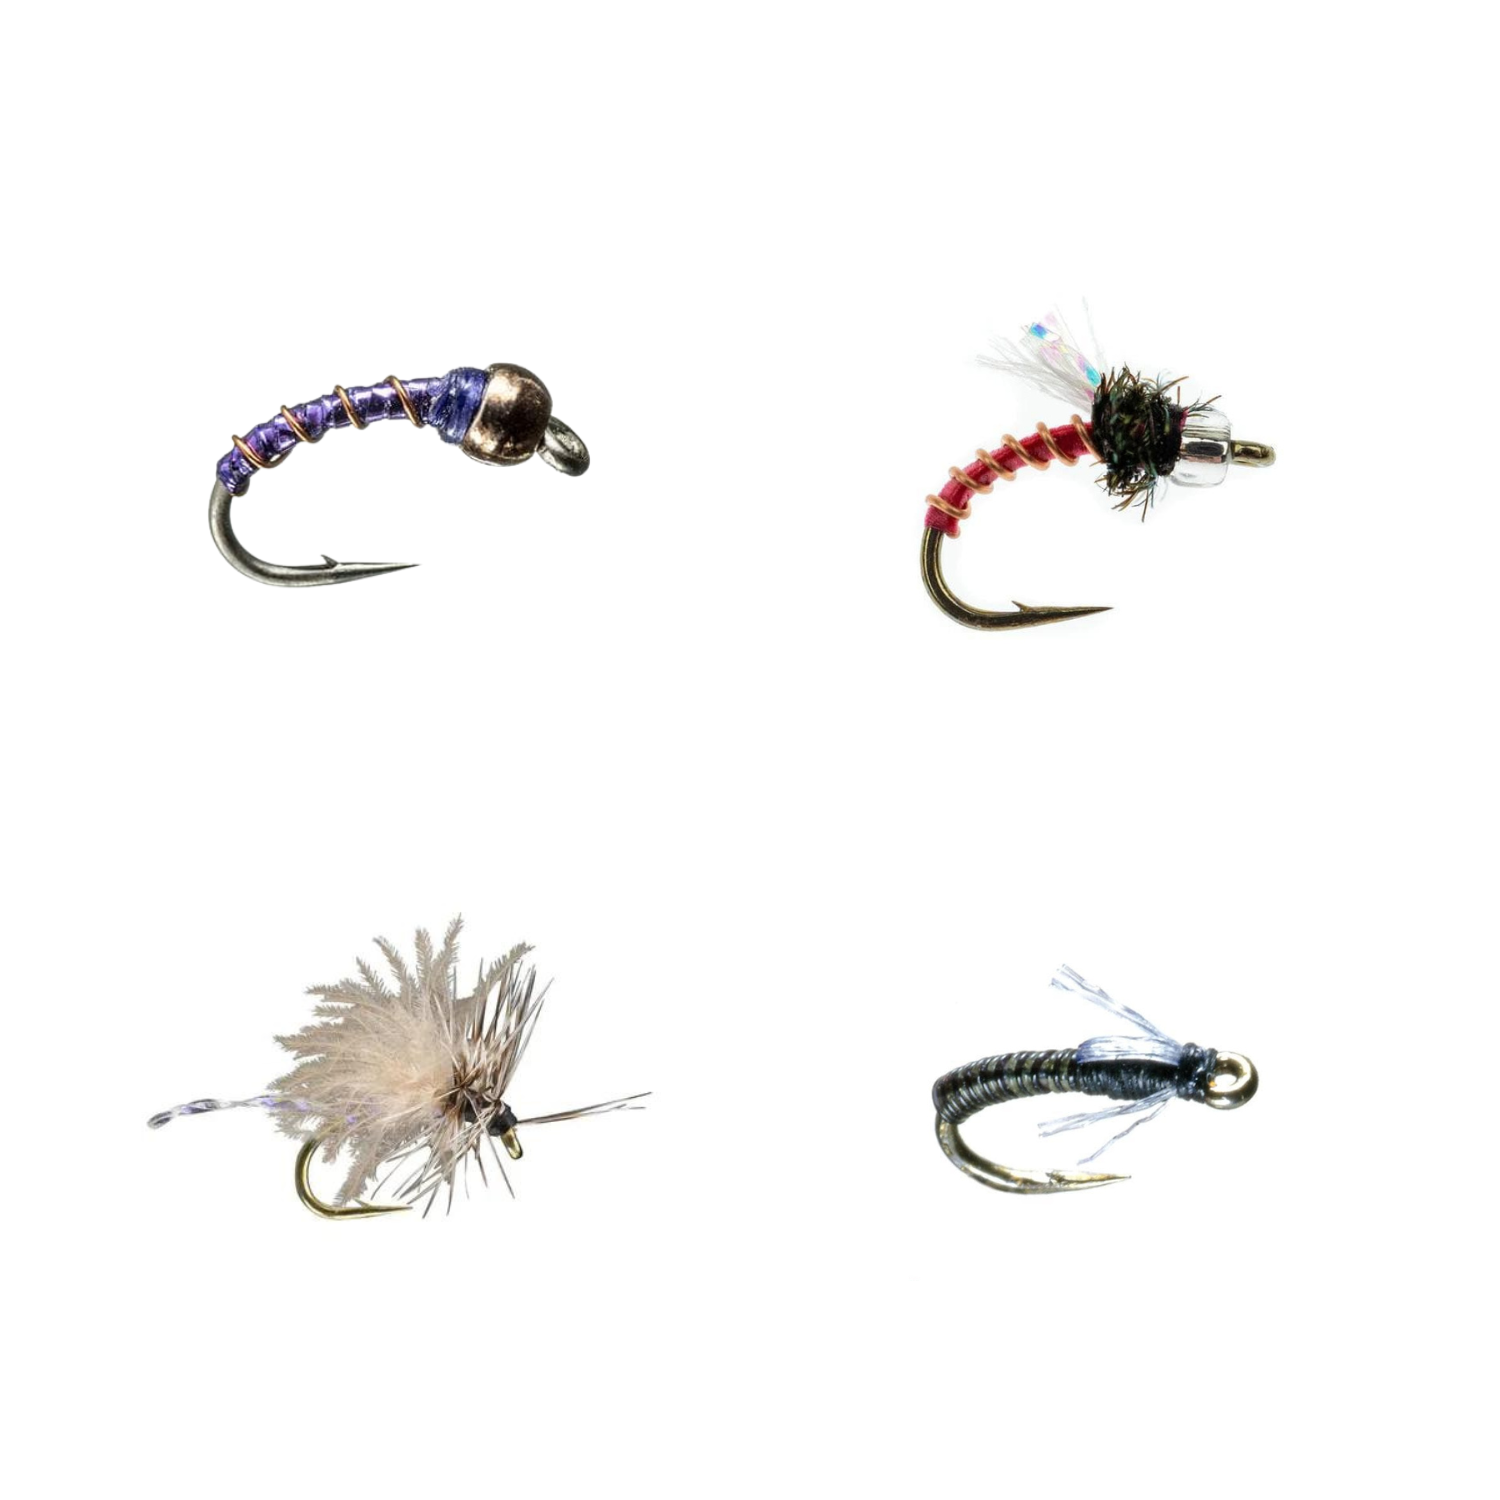 Midge Assortment, Flys and Guides